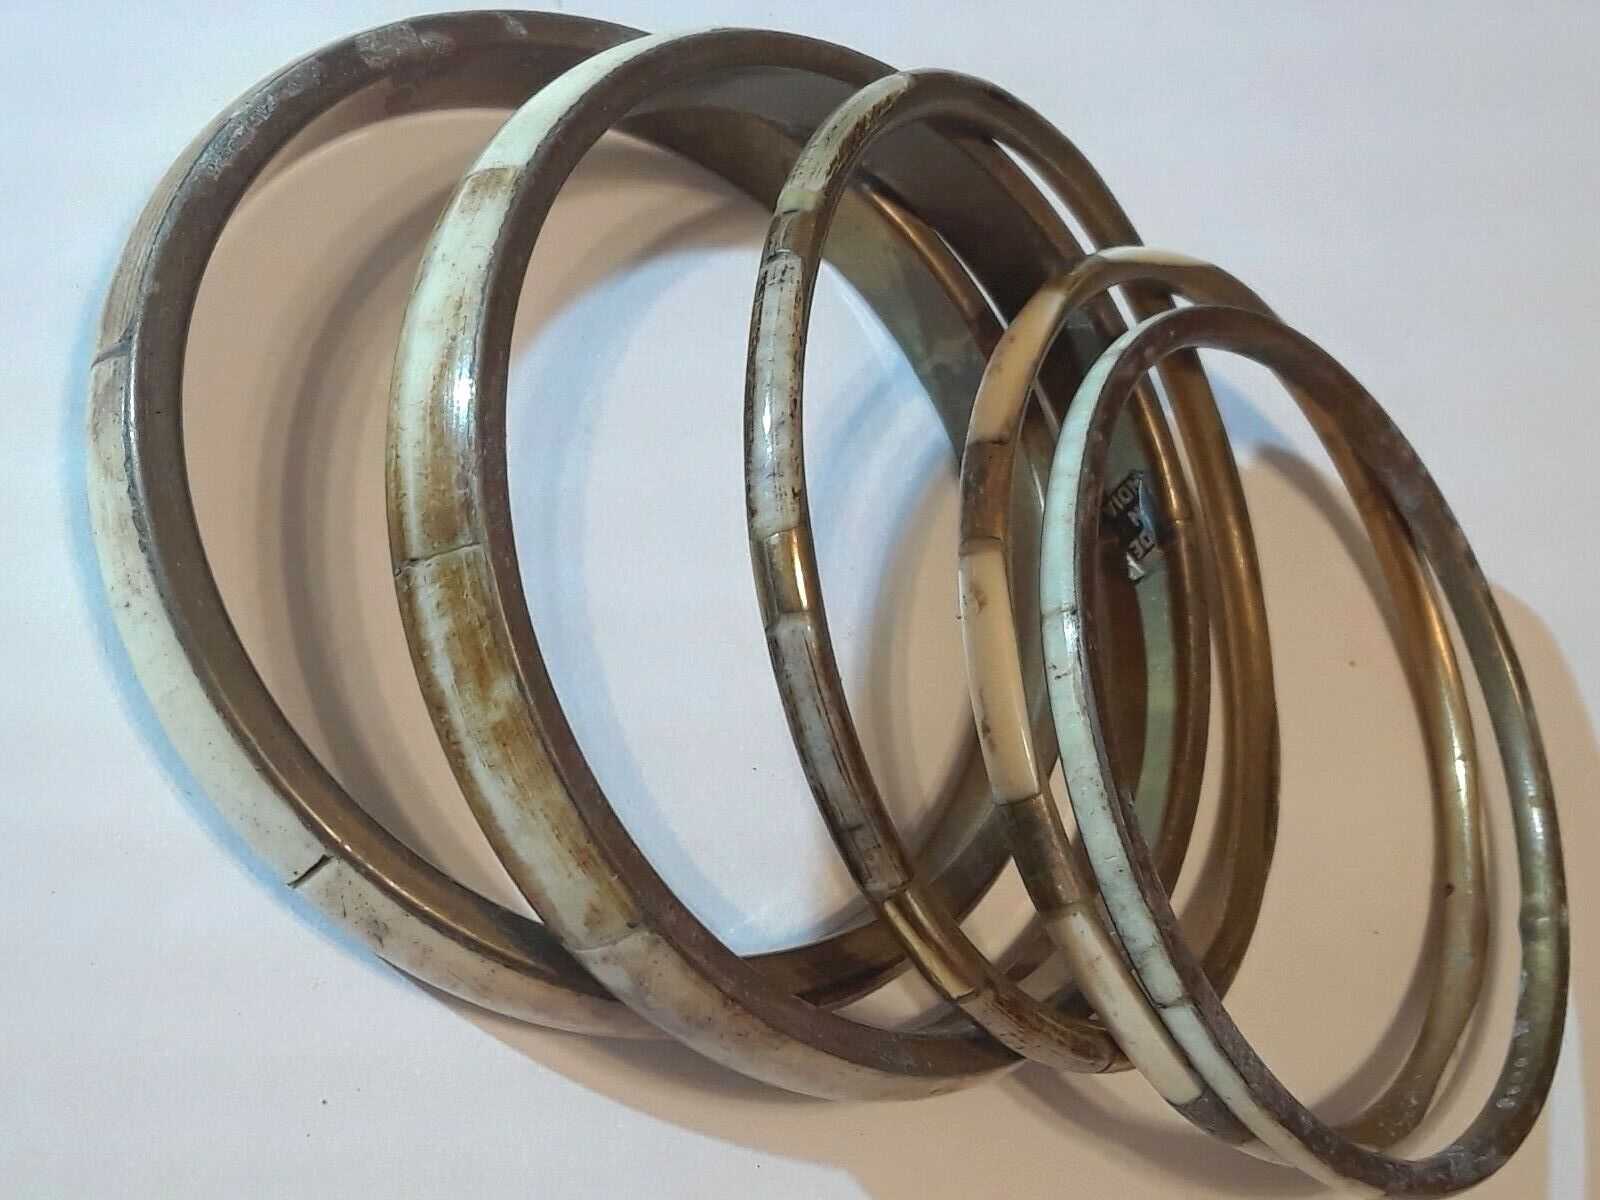 Lot of 5 gold tone bangle bracelets with inlay stone. Made in India. Beautiful! Unbranded - фотография #3